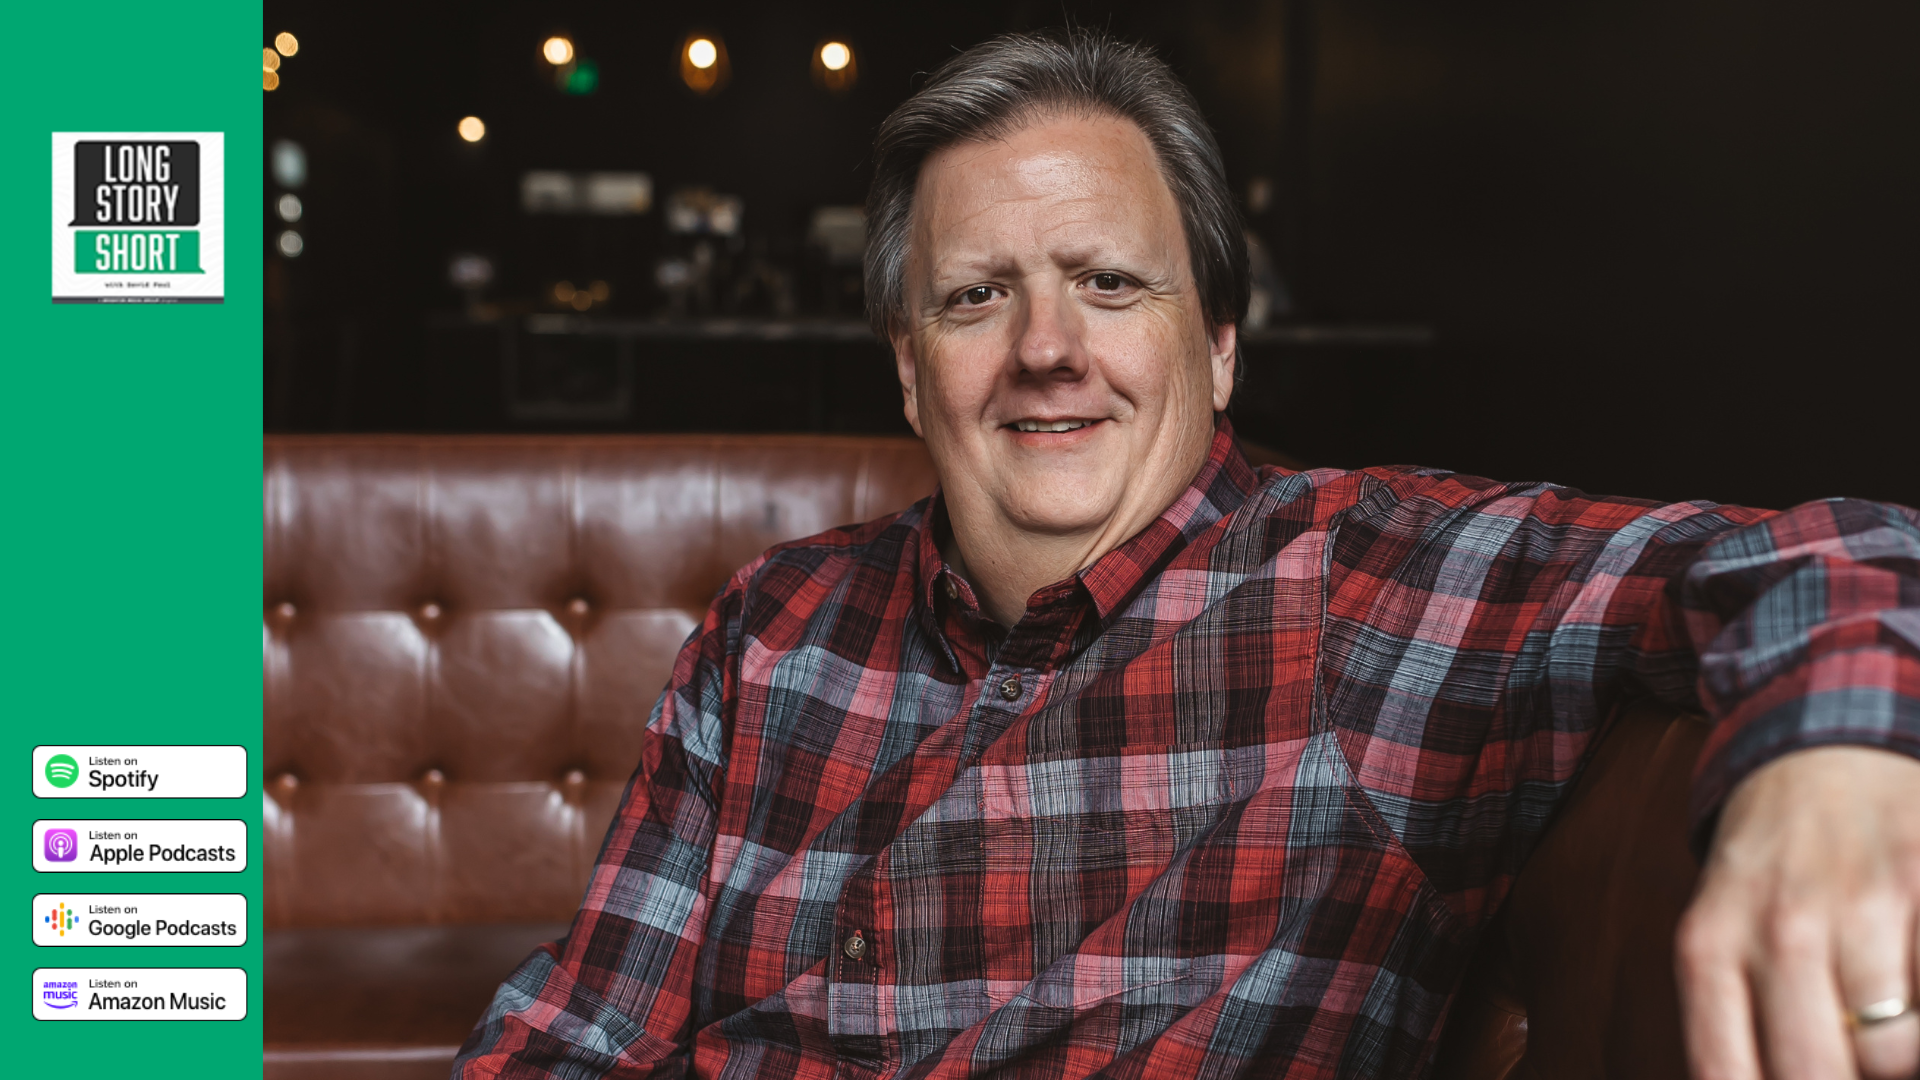 Mike Alley wearing a red and grey plaid shirt while smiling and sitting on a brown leather couch